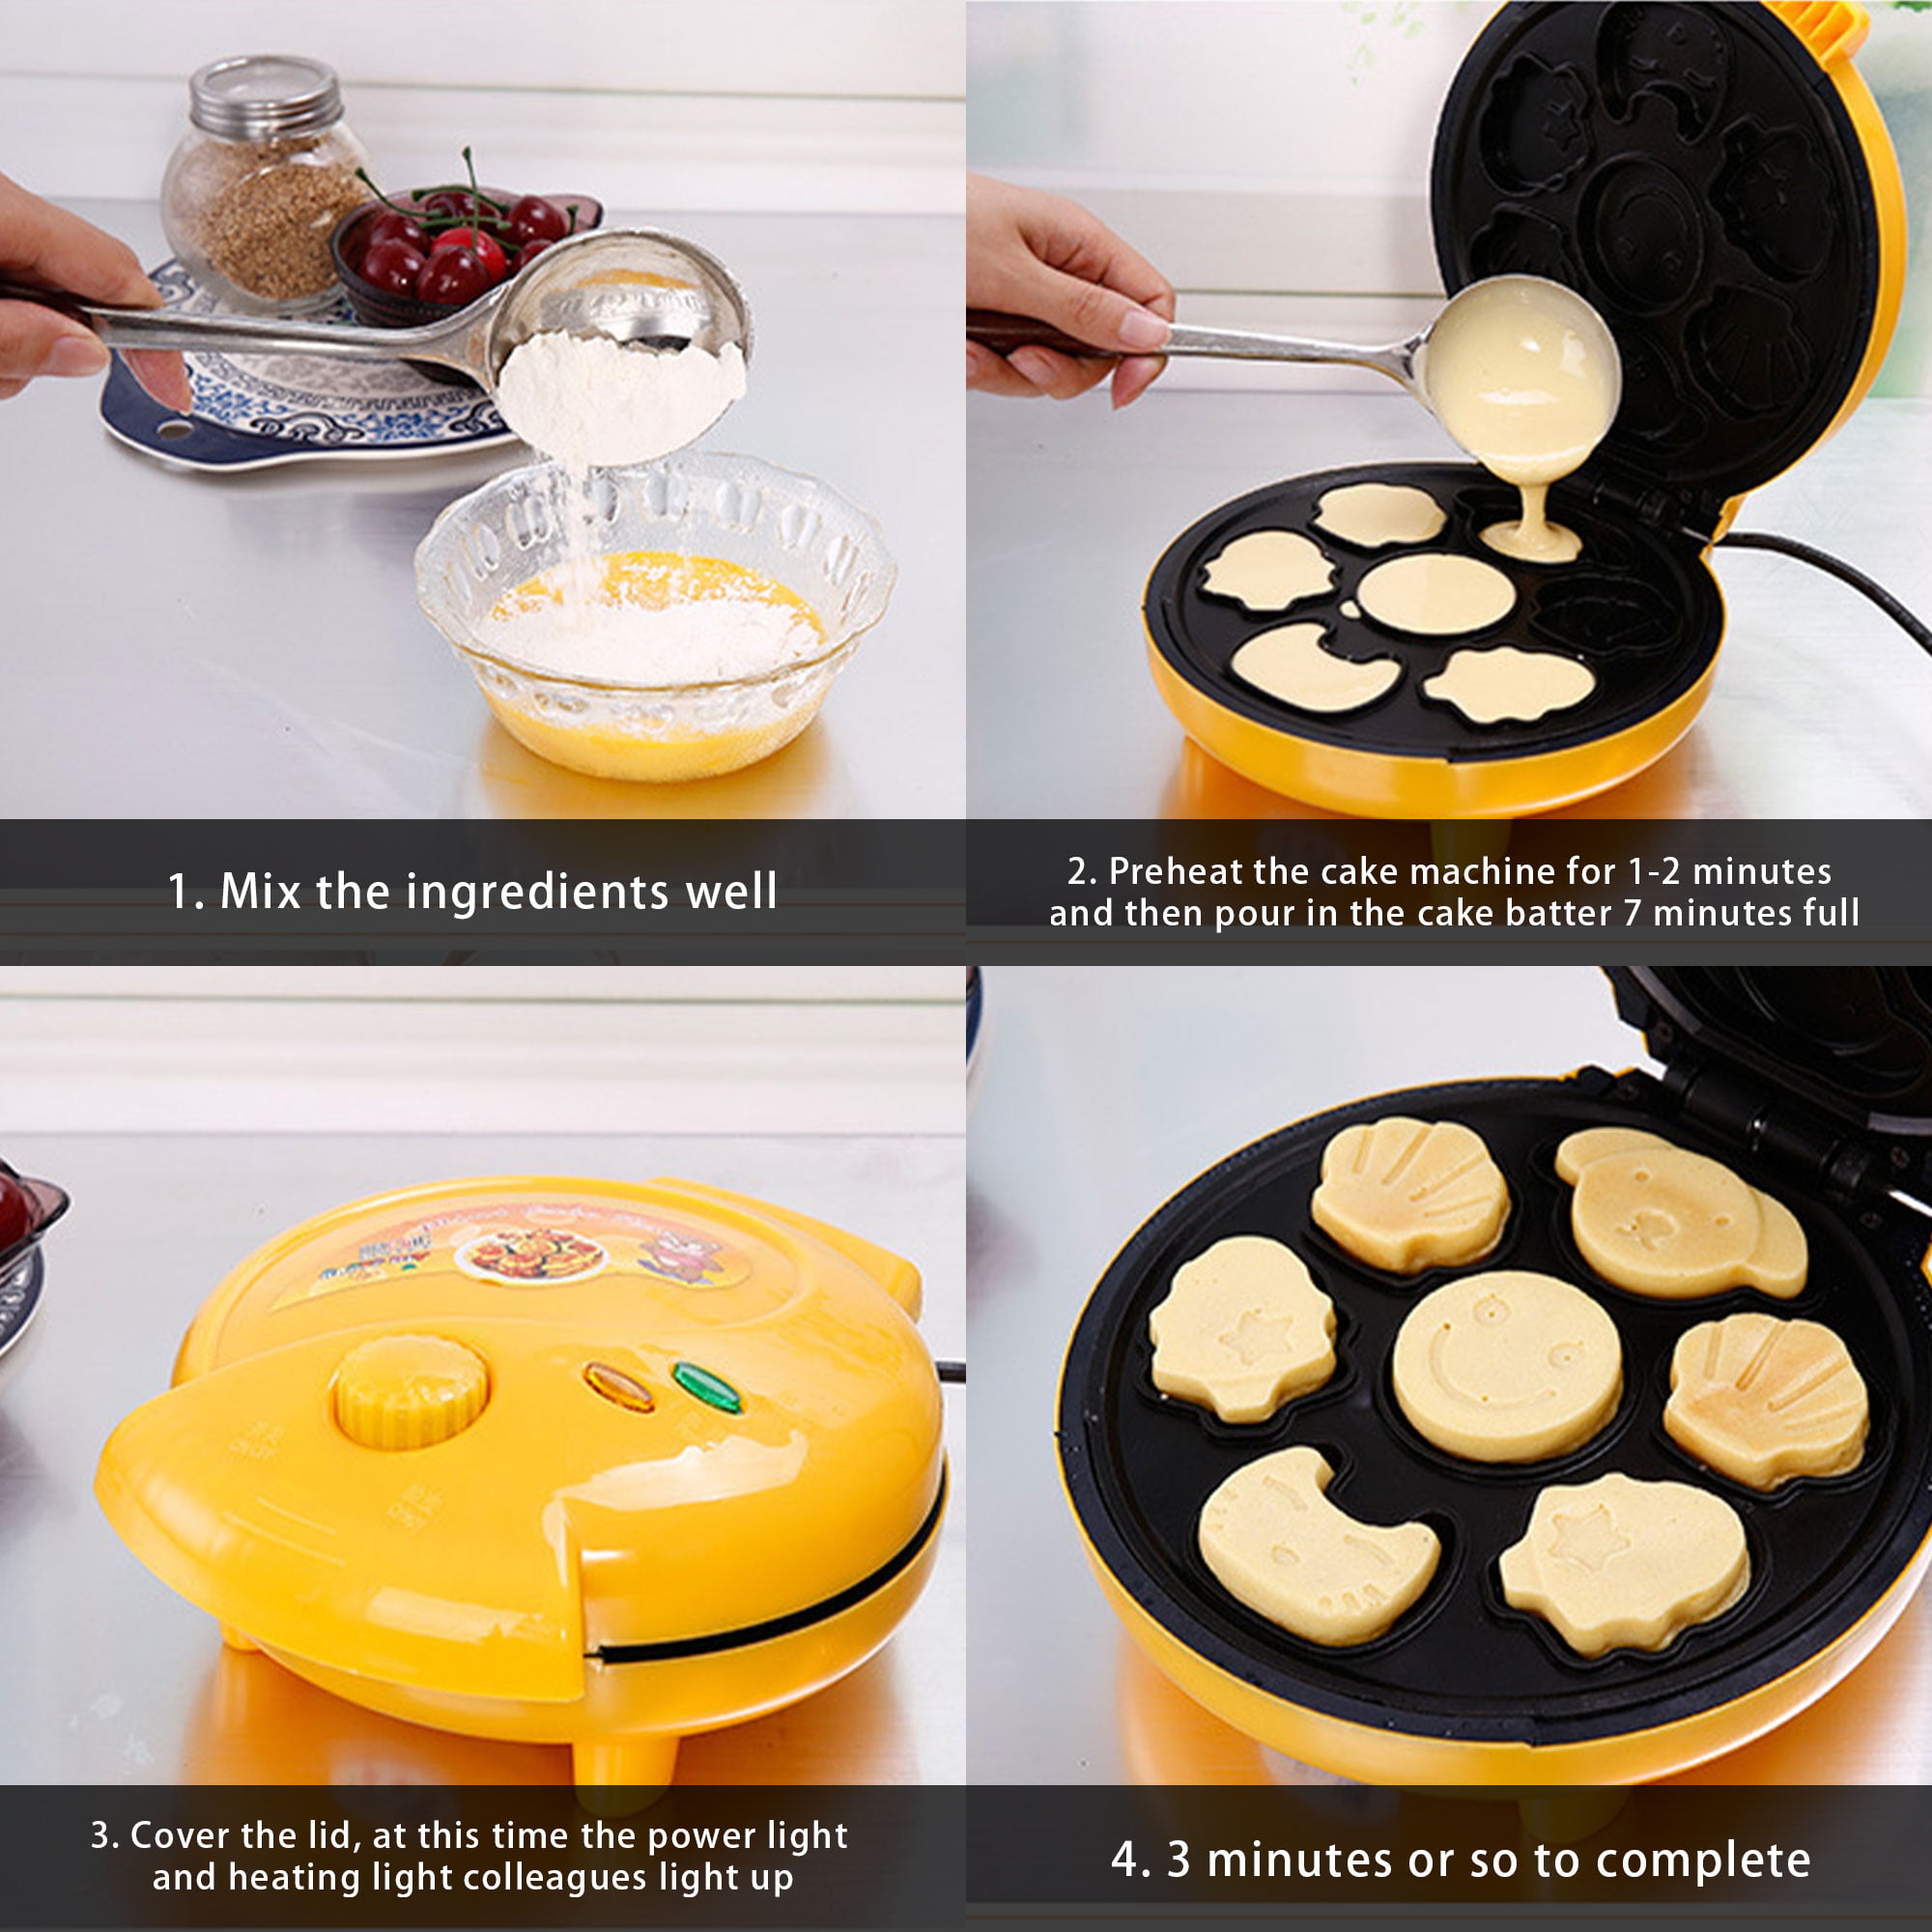 Kids Mini Pancake Maker with 7 Fun Animal Face Shapes - Easy to Use  Non-Stick Electric Griddle Waffle Maker by Tettonia